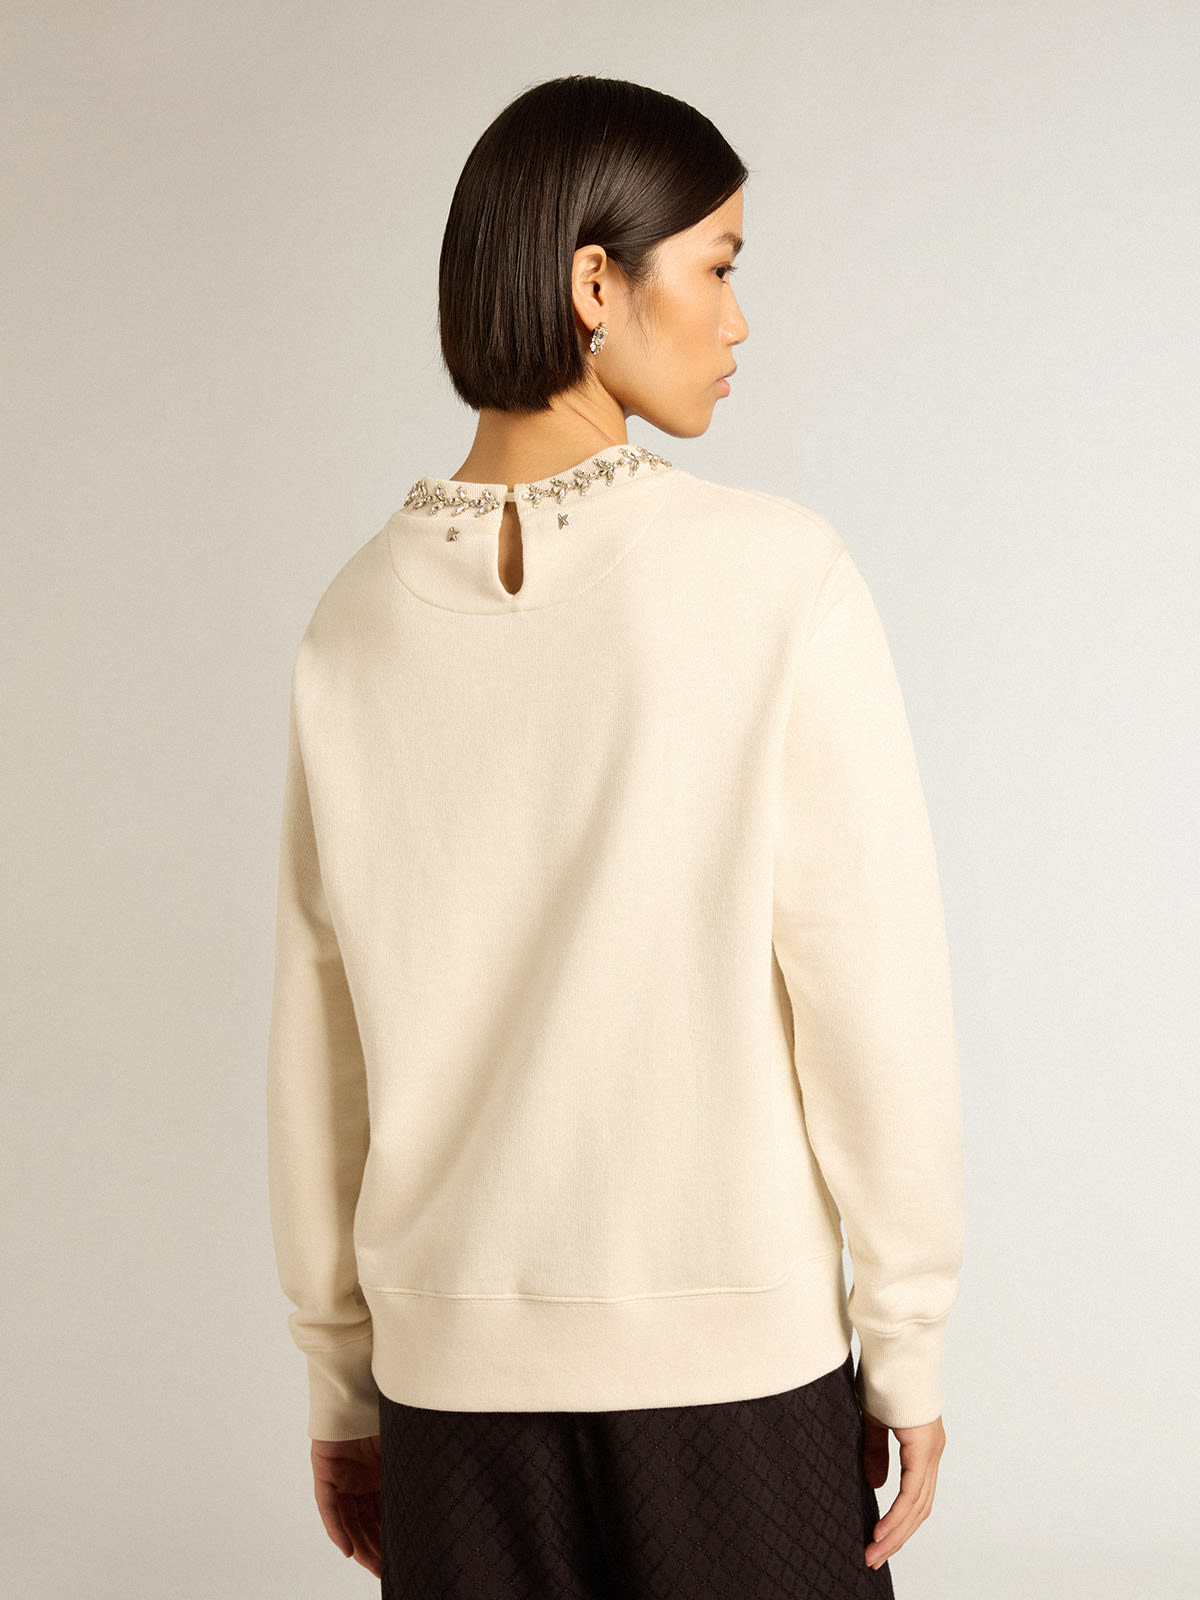 Golden Goose - Round-neck cotton sweatshirt in aged white with hand-applied crystals in 